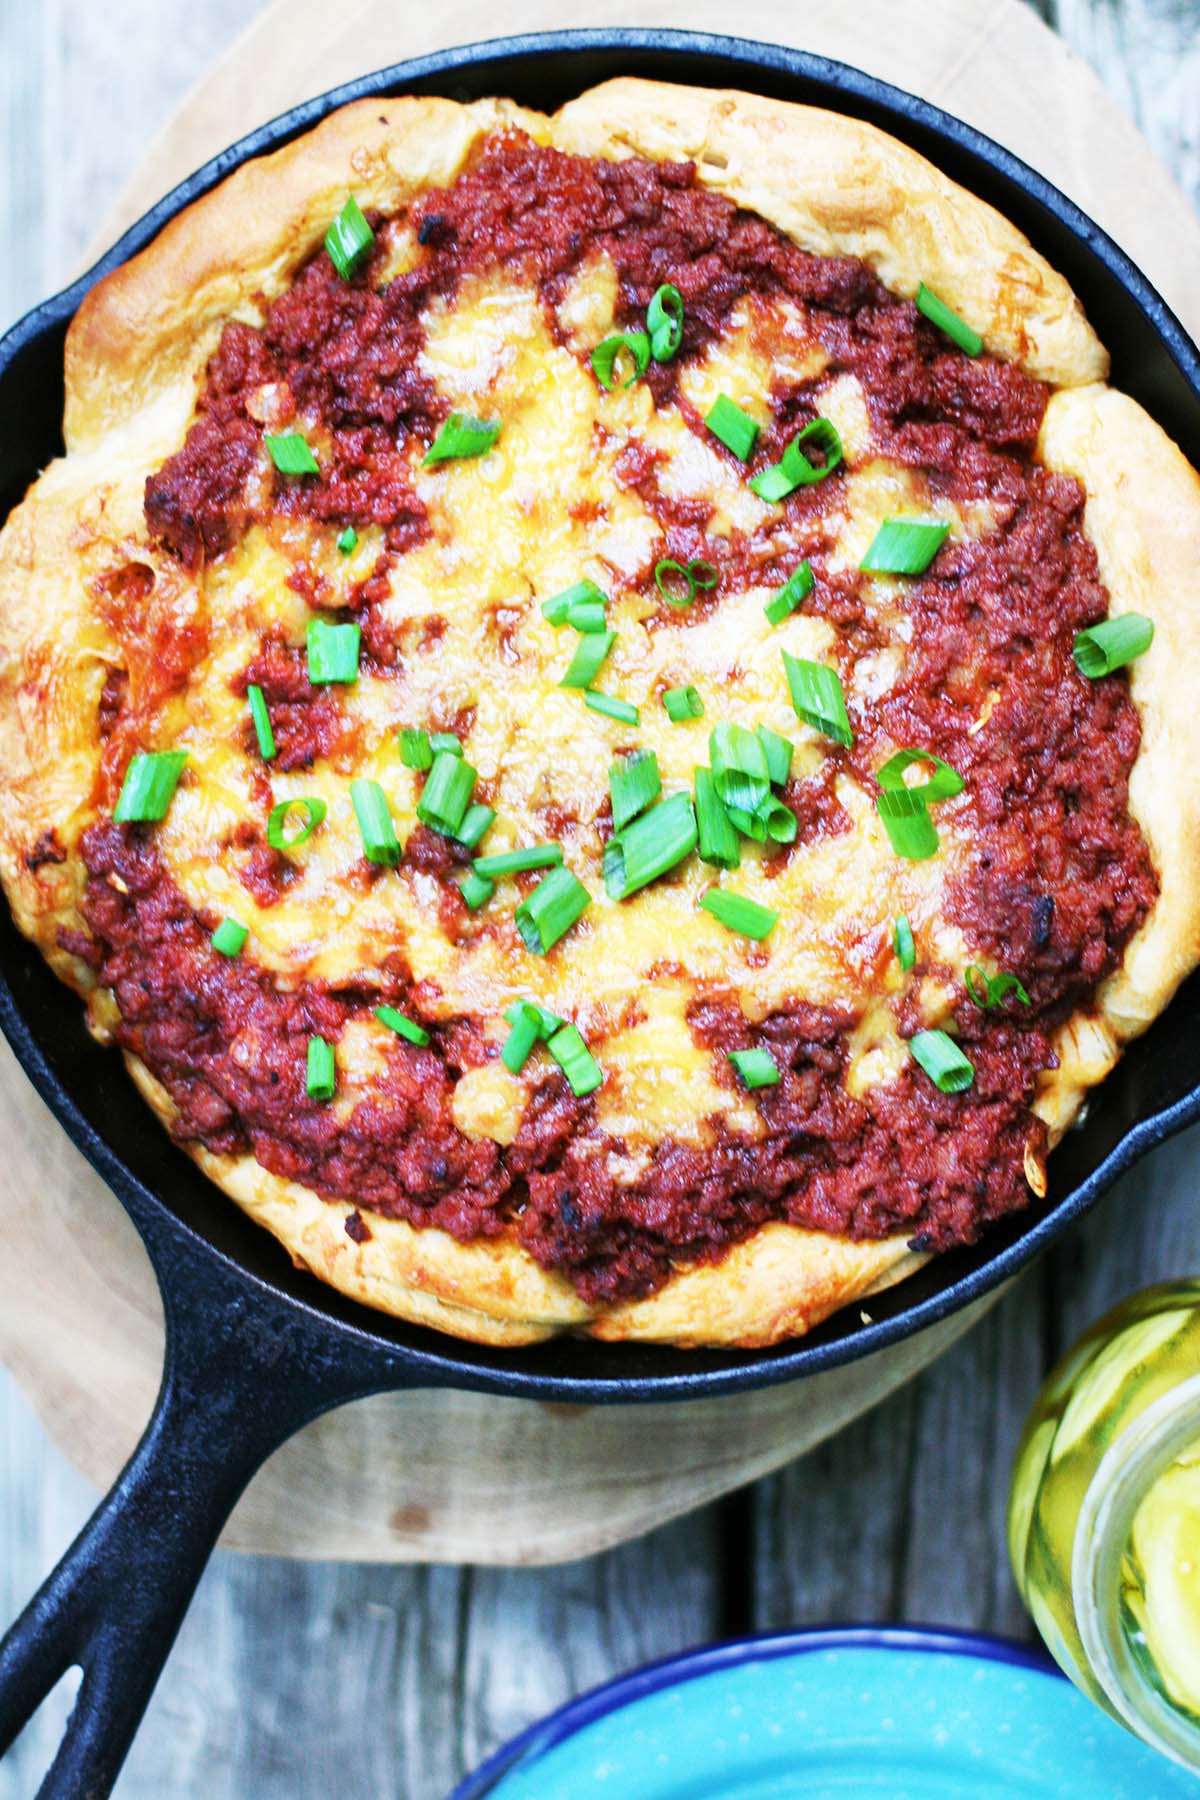 Cheesy sloppy joe pie: Perfect for a weeknight meal. Comes together fast but is totally satisfying!